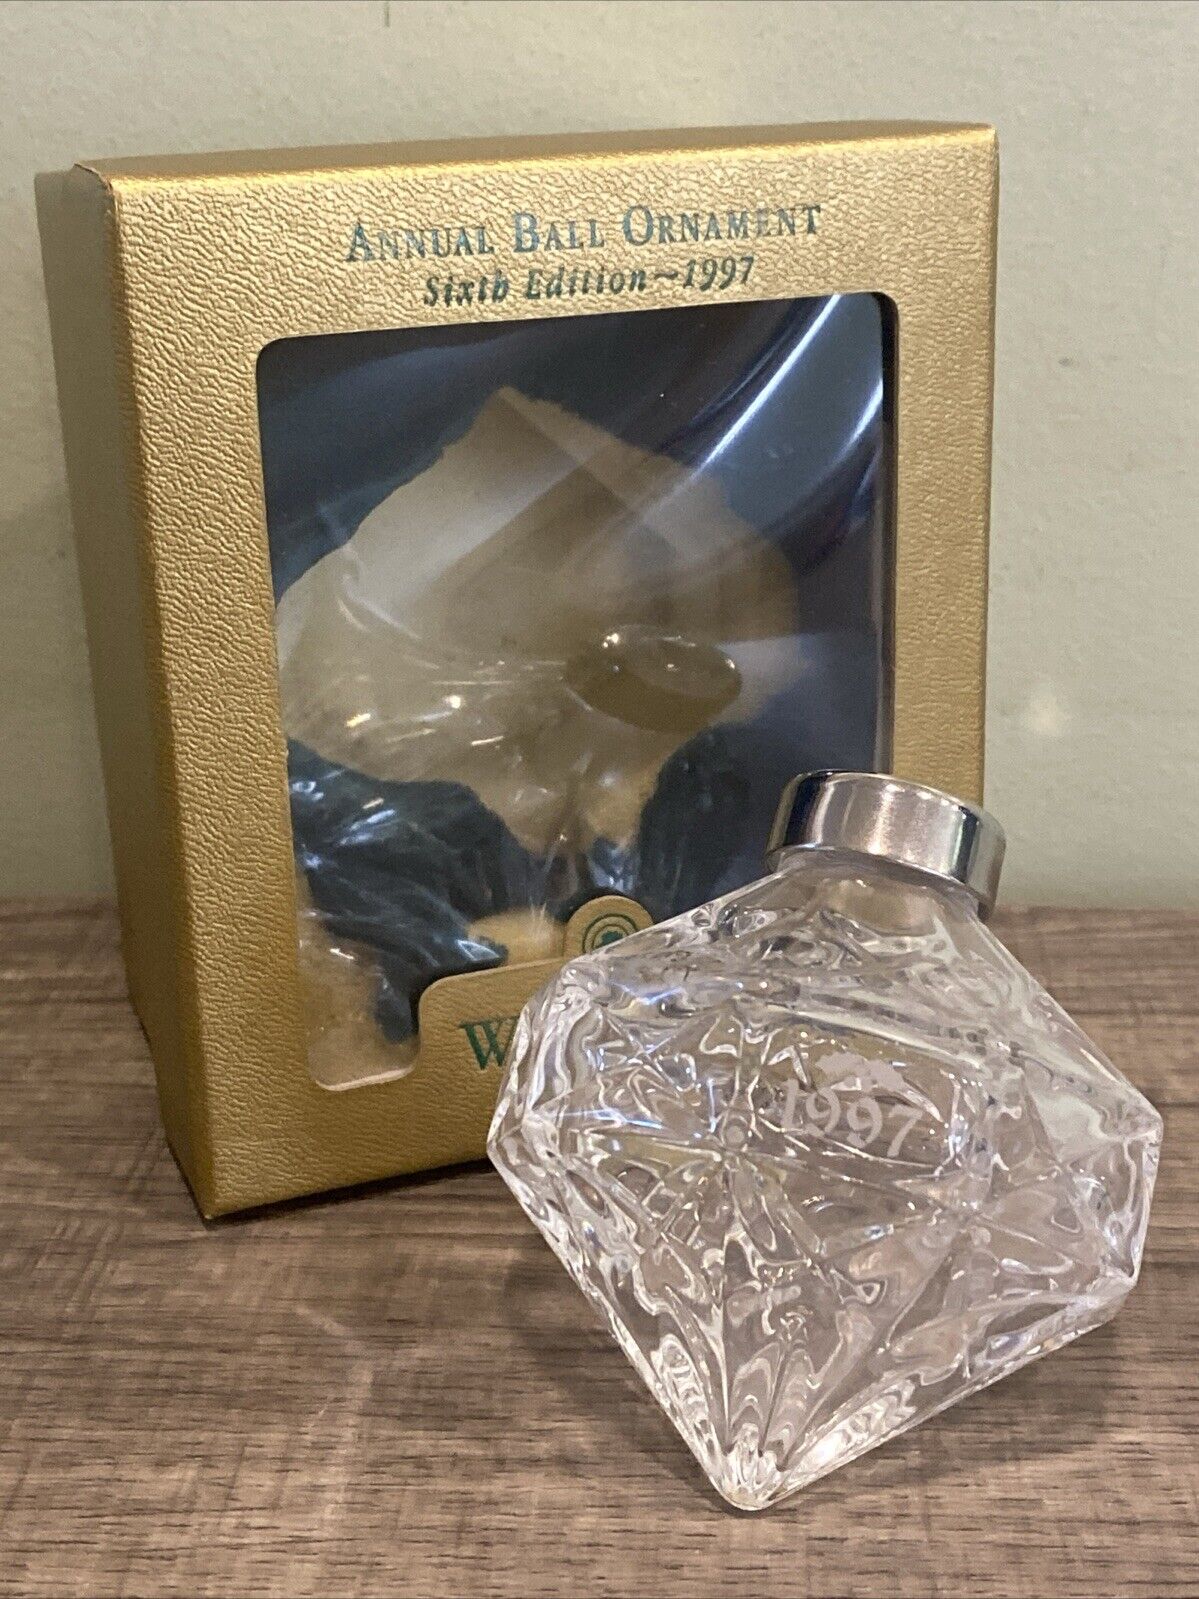 Waterford Crystal 1997 Annual Ball Ornament 6th Edition in Original Box